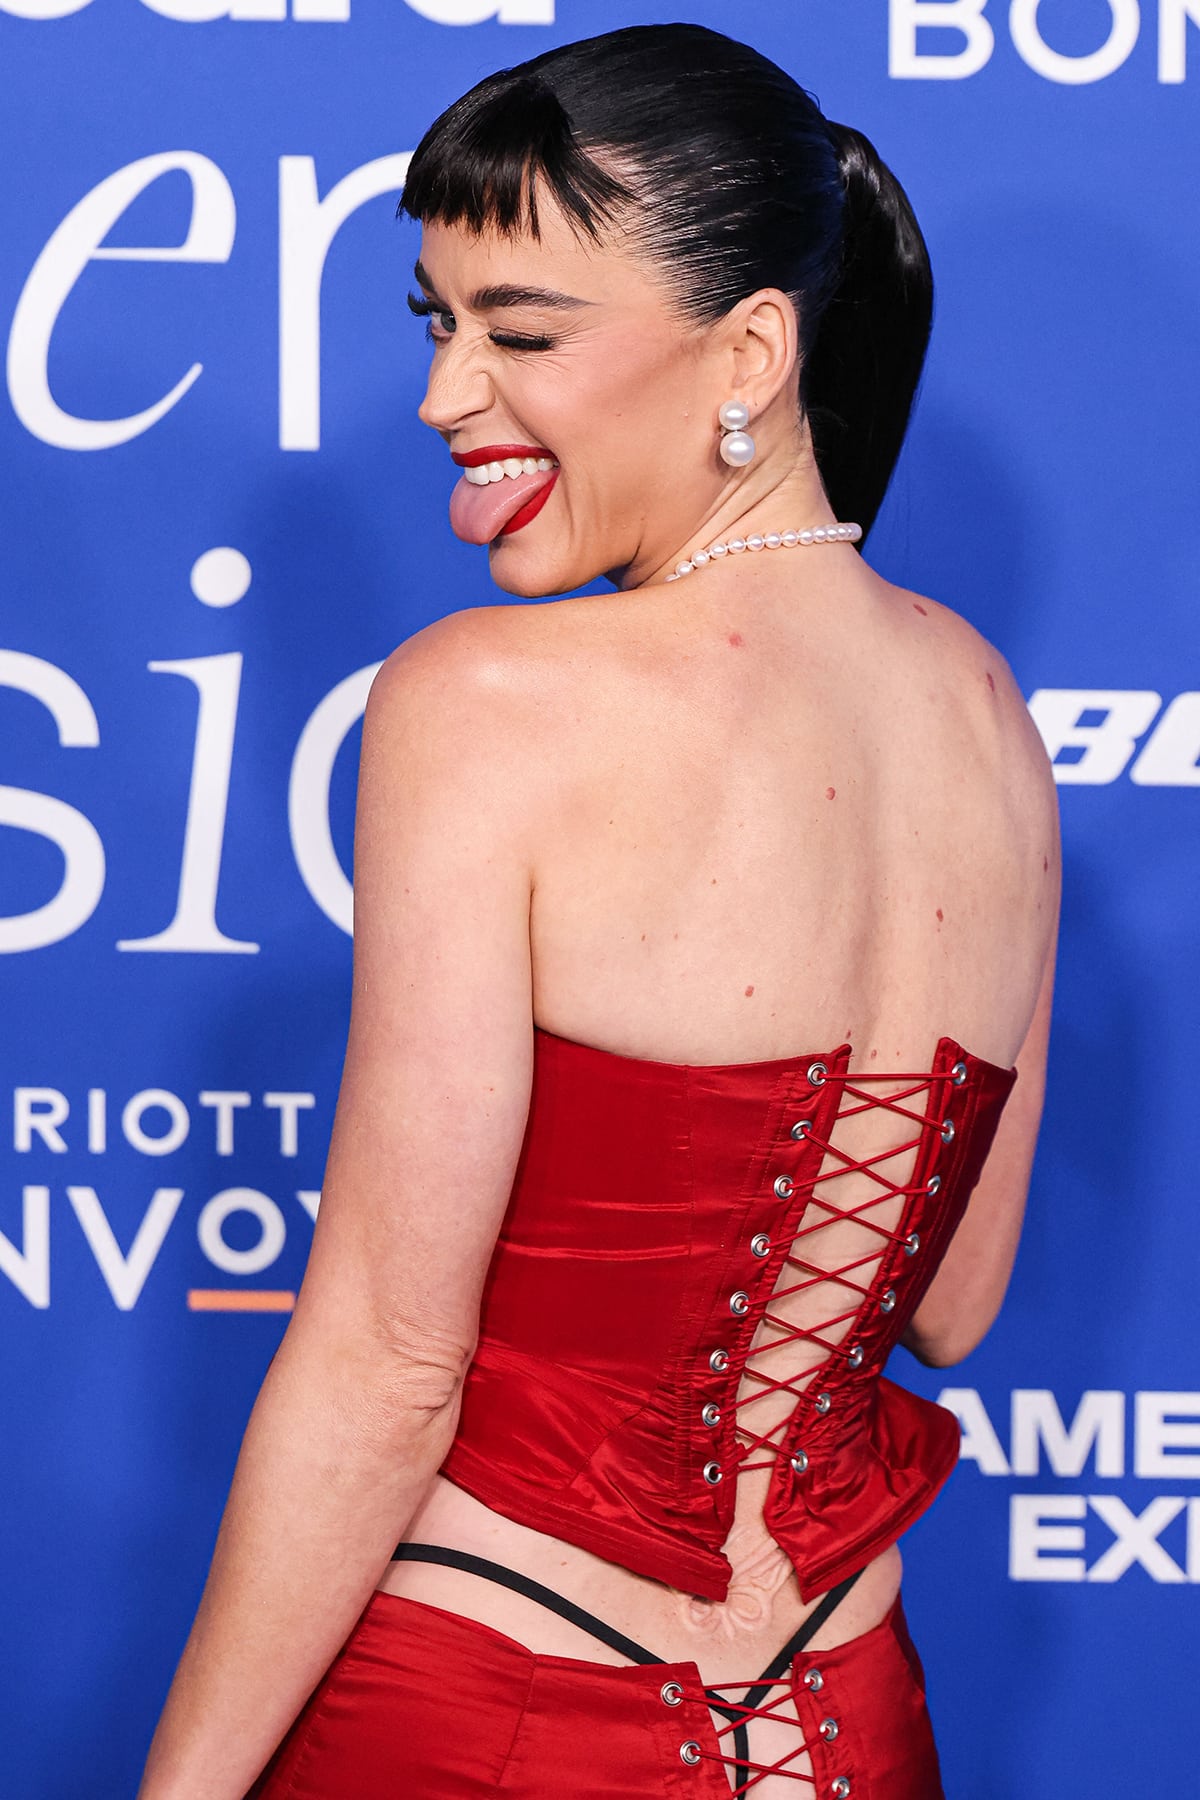 Katy Perry reveals her black G-string underwear and 3D butterfly prosthetic lower back tattoo in a red corset top and a low-waist skirt